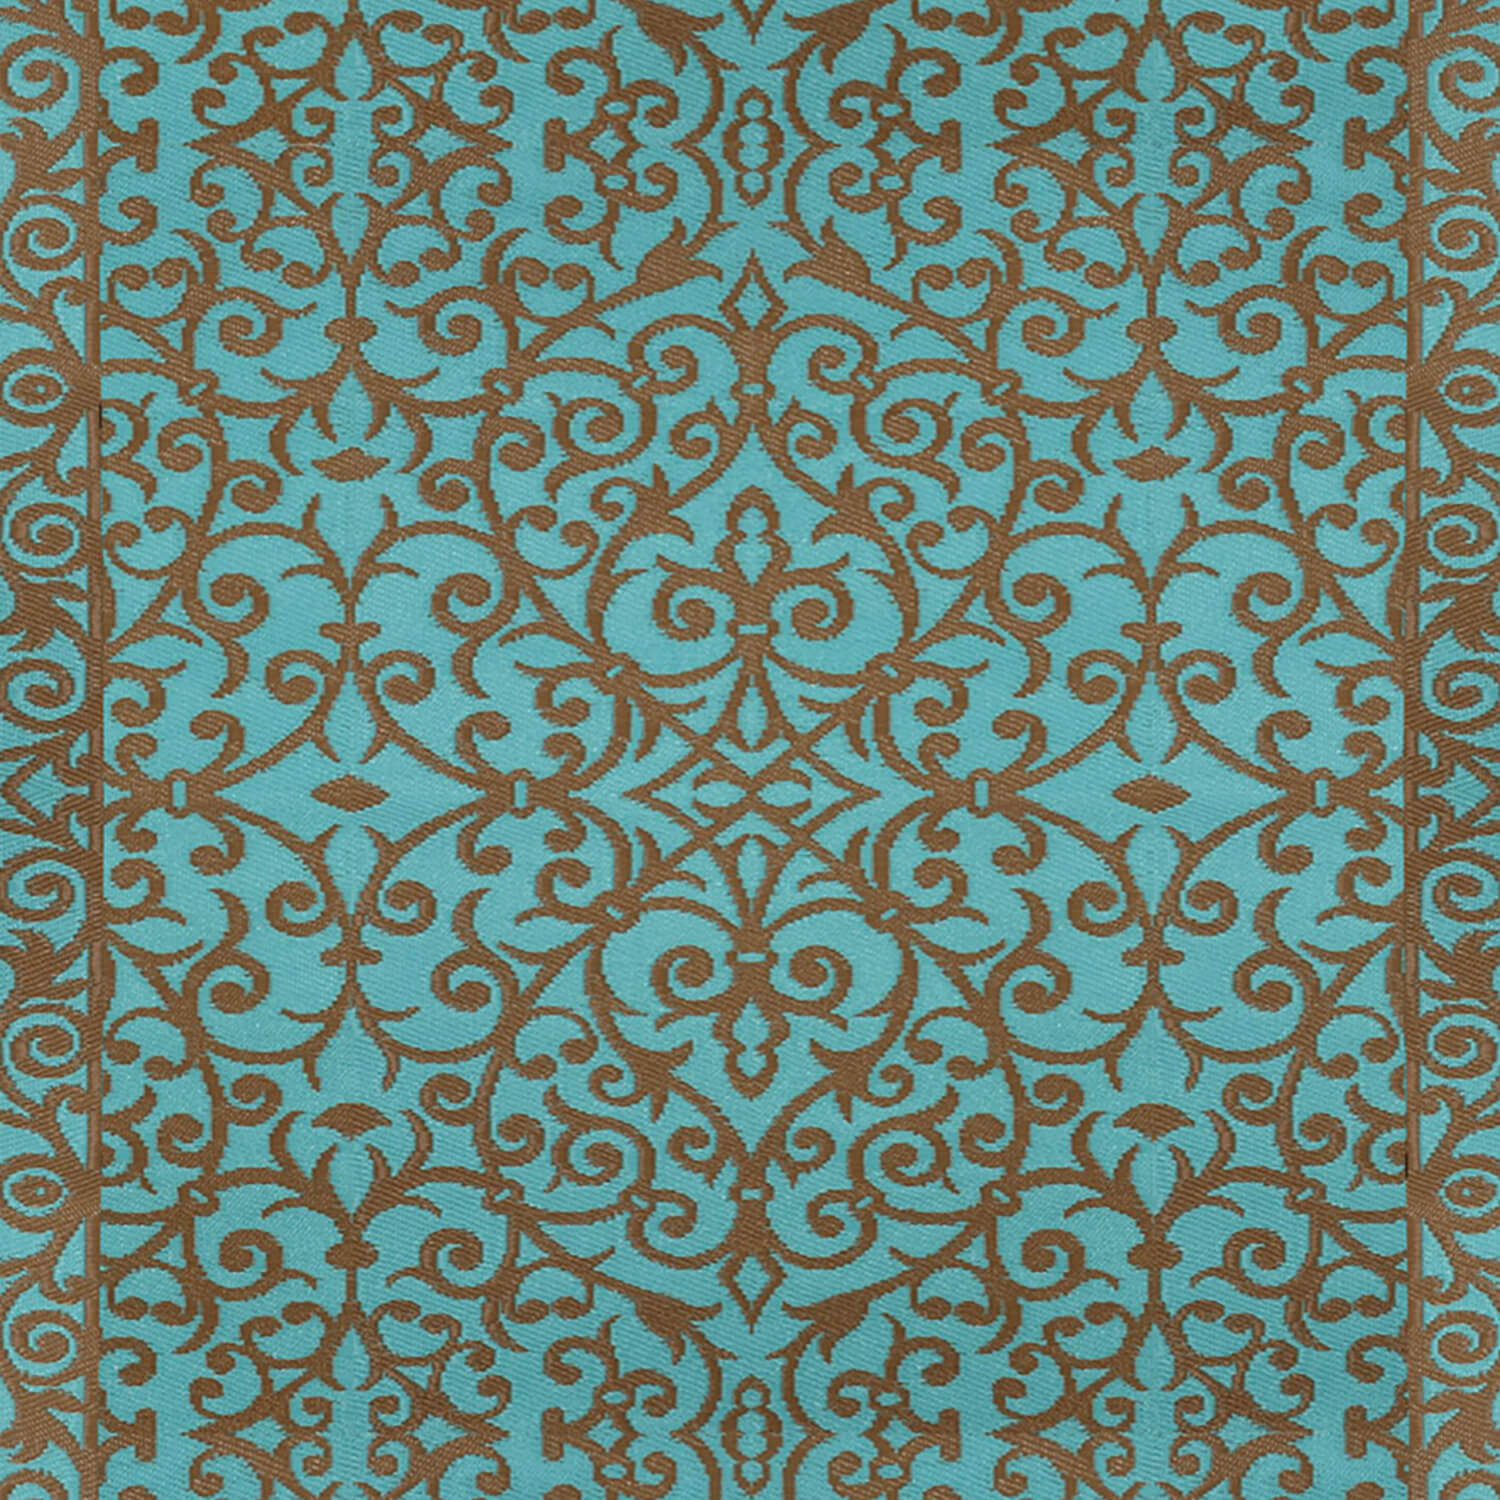 Gala Outdoor Recycled Plastic Rug (Blue Turquoise/Gold)